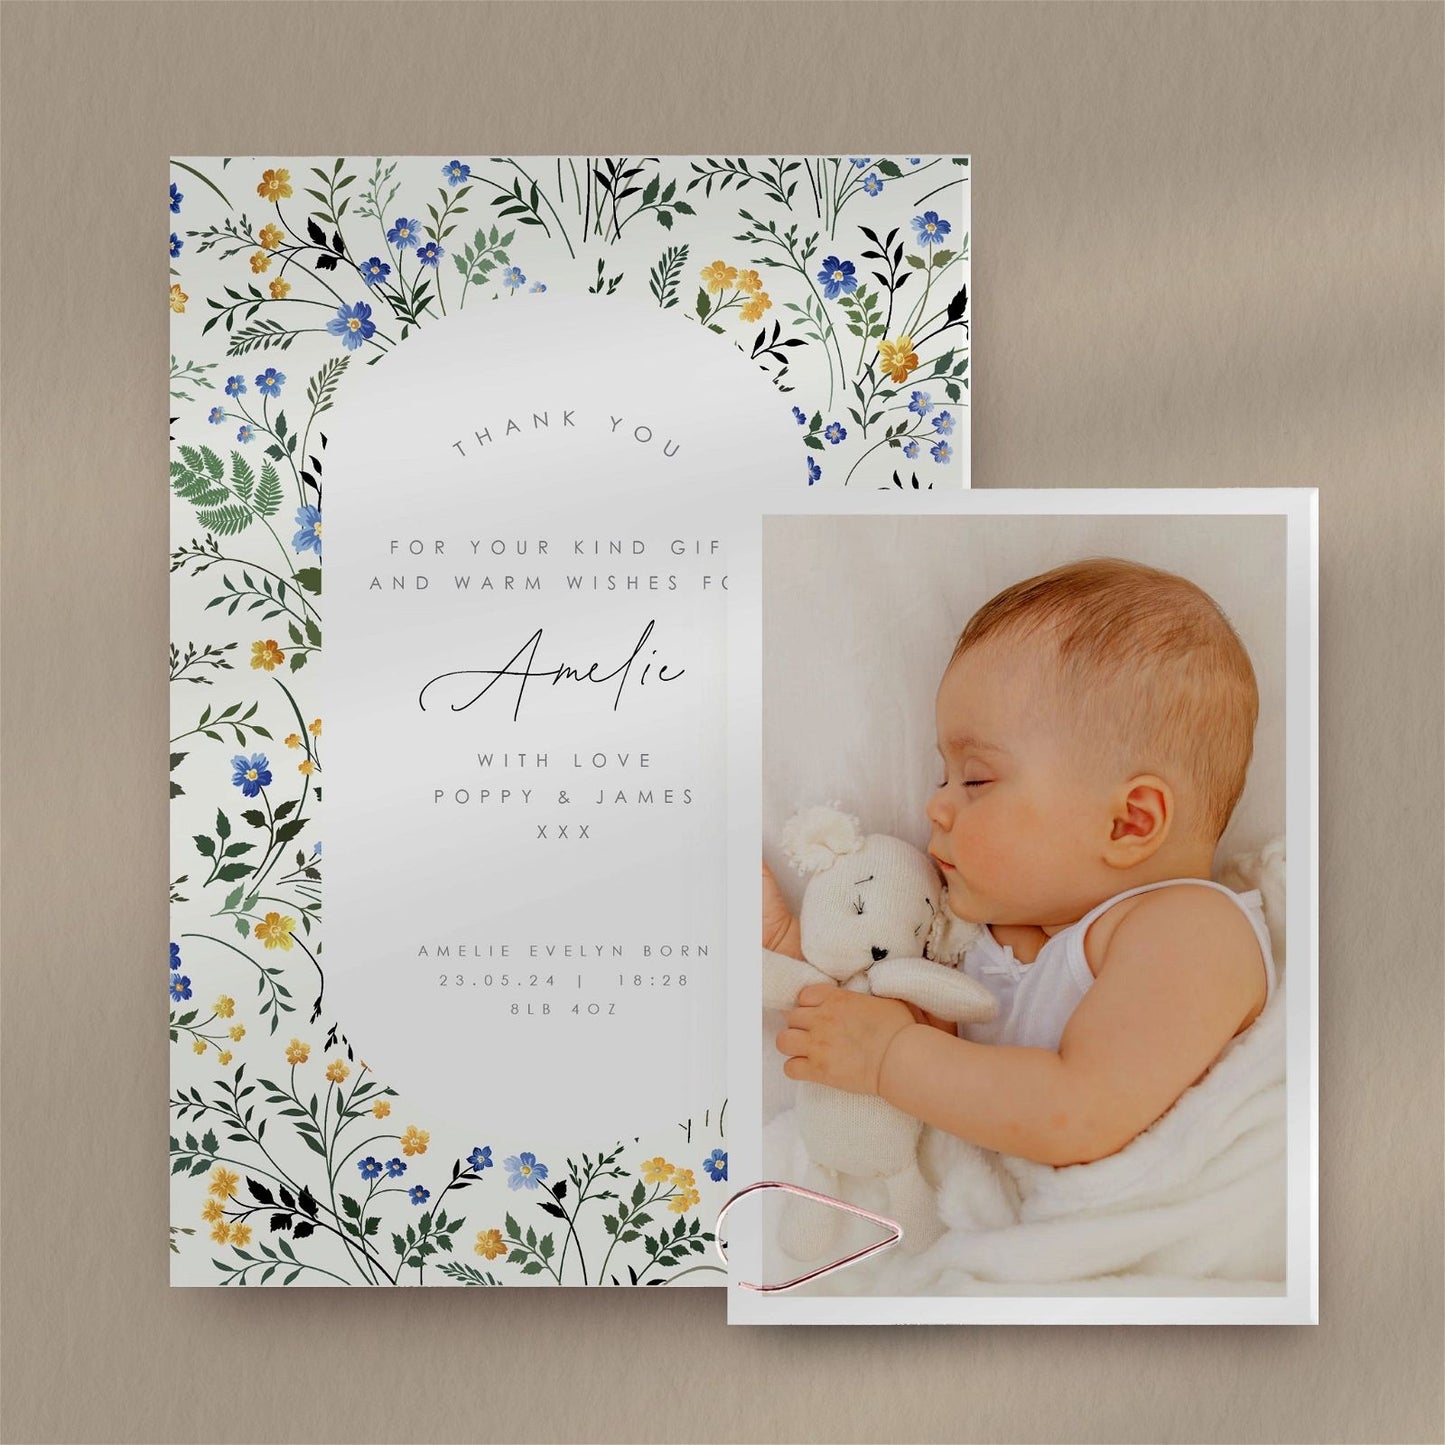 Birth Announcement Sample  Ivy and Gold Wedding Stationery Amelie  